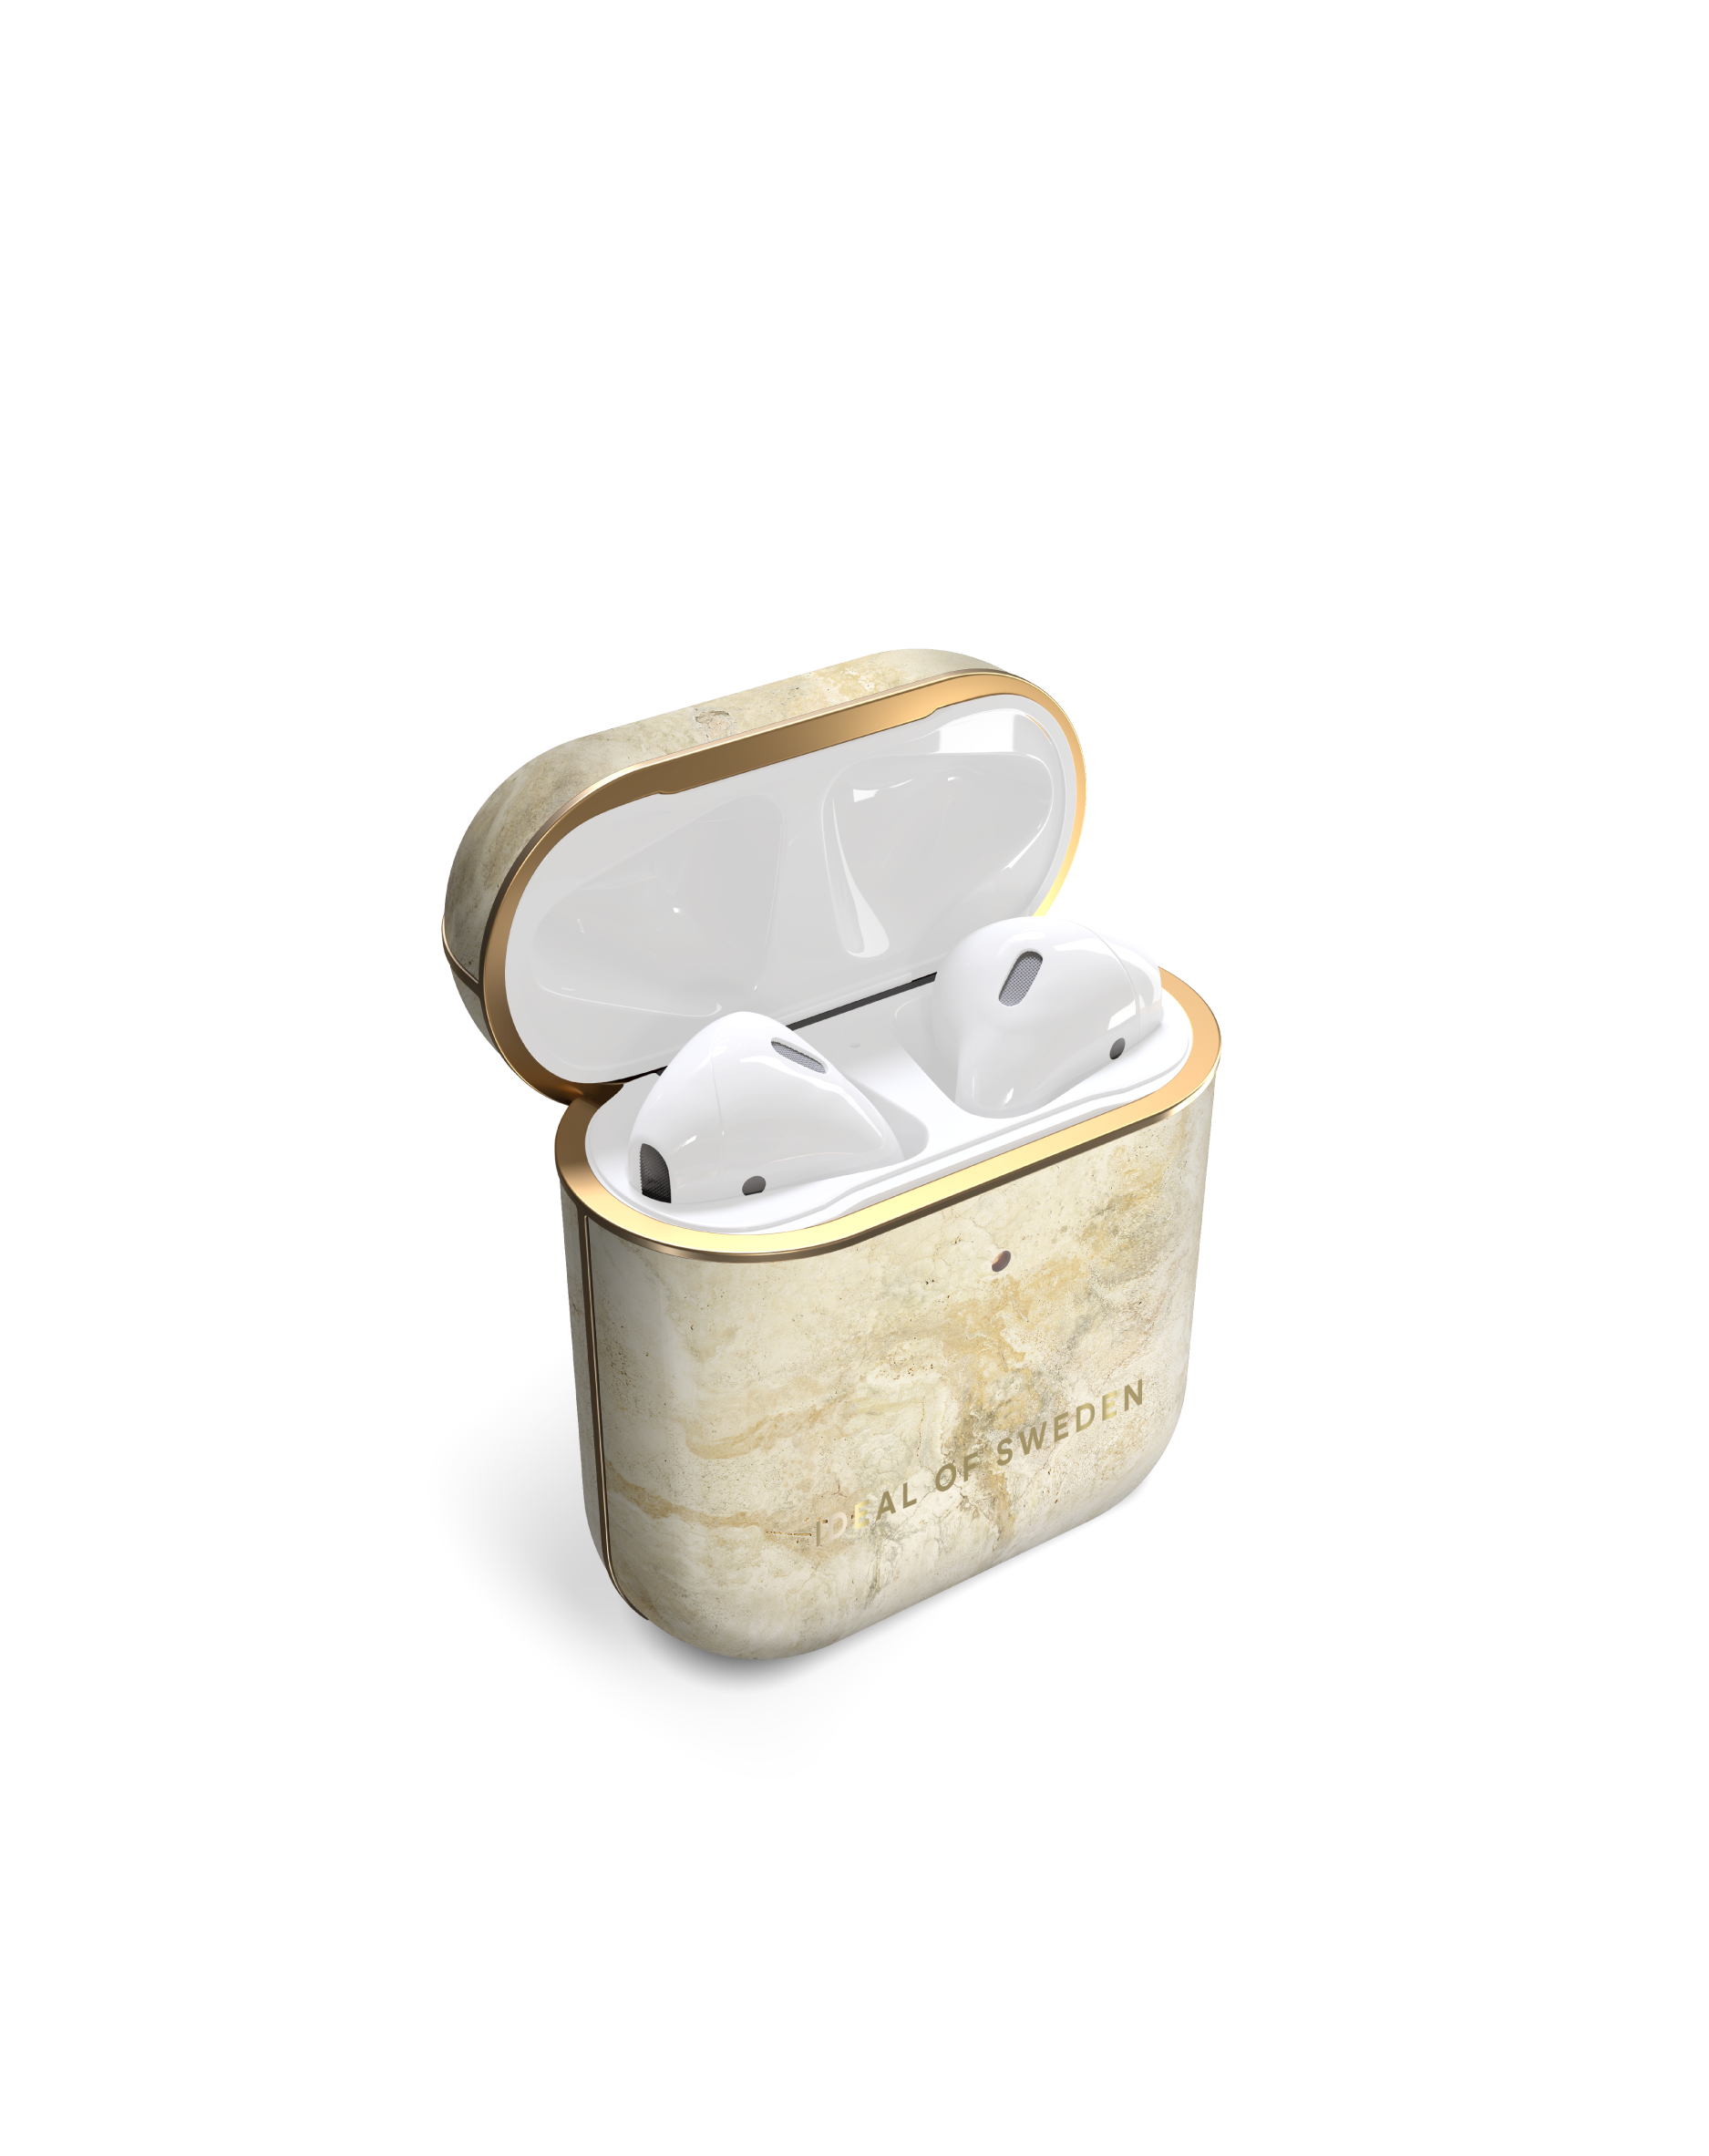 Full passend für: Case Sandstorm Marble IDEAL AirPod IDFAPC-195 OF Apple SWEDEN Cover